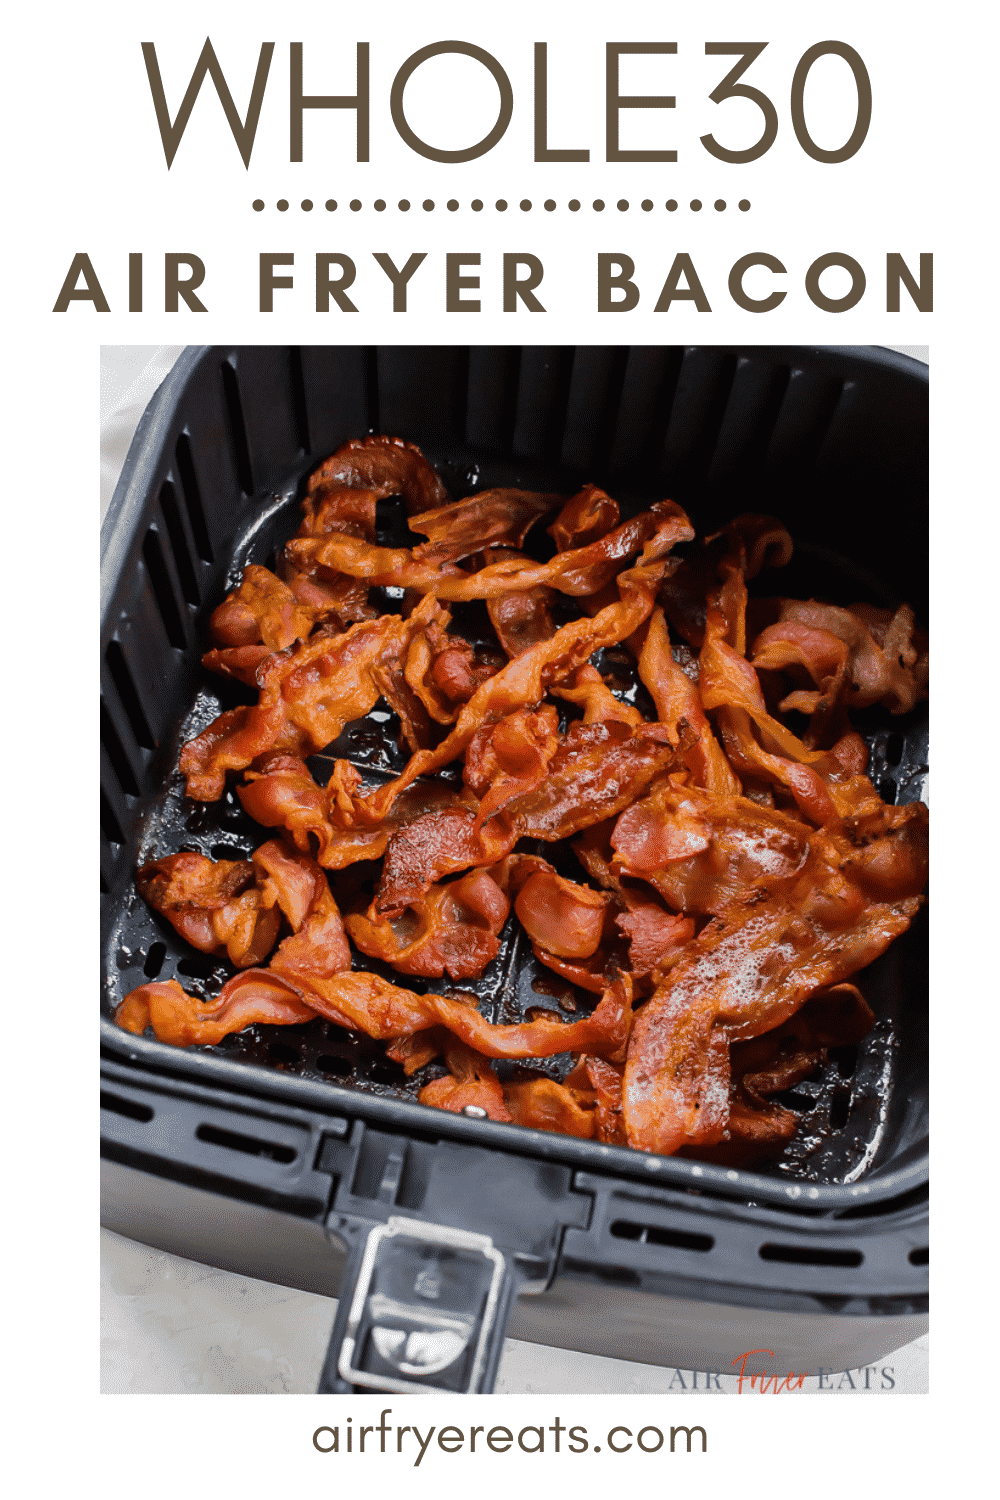 Air Fryer Bacon is a quick and easy recipe for the best crispy bacon! Once you cook bacon in your air fryer, you'll never go back to the old way again! #bacon #airfryer #airfryerbacon #crispybacon via @vegetarianmamma